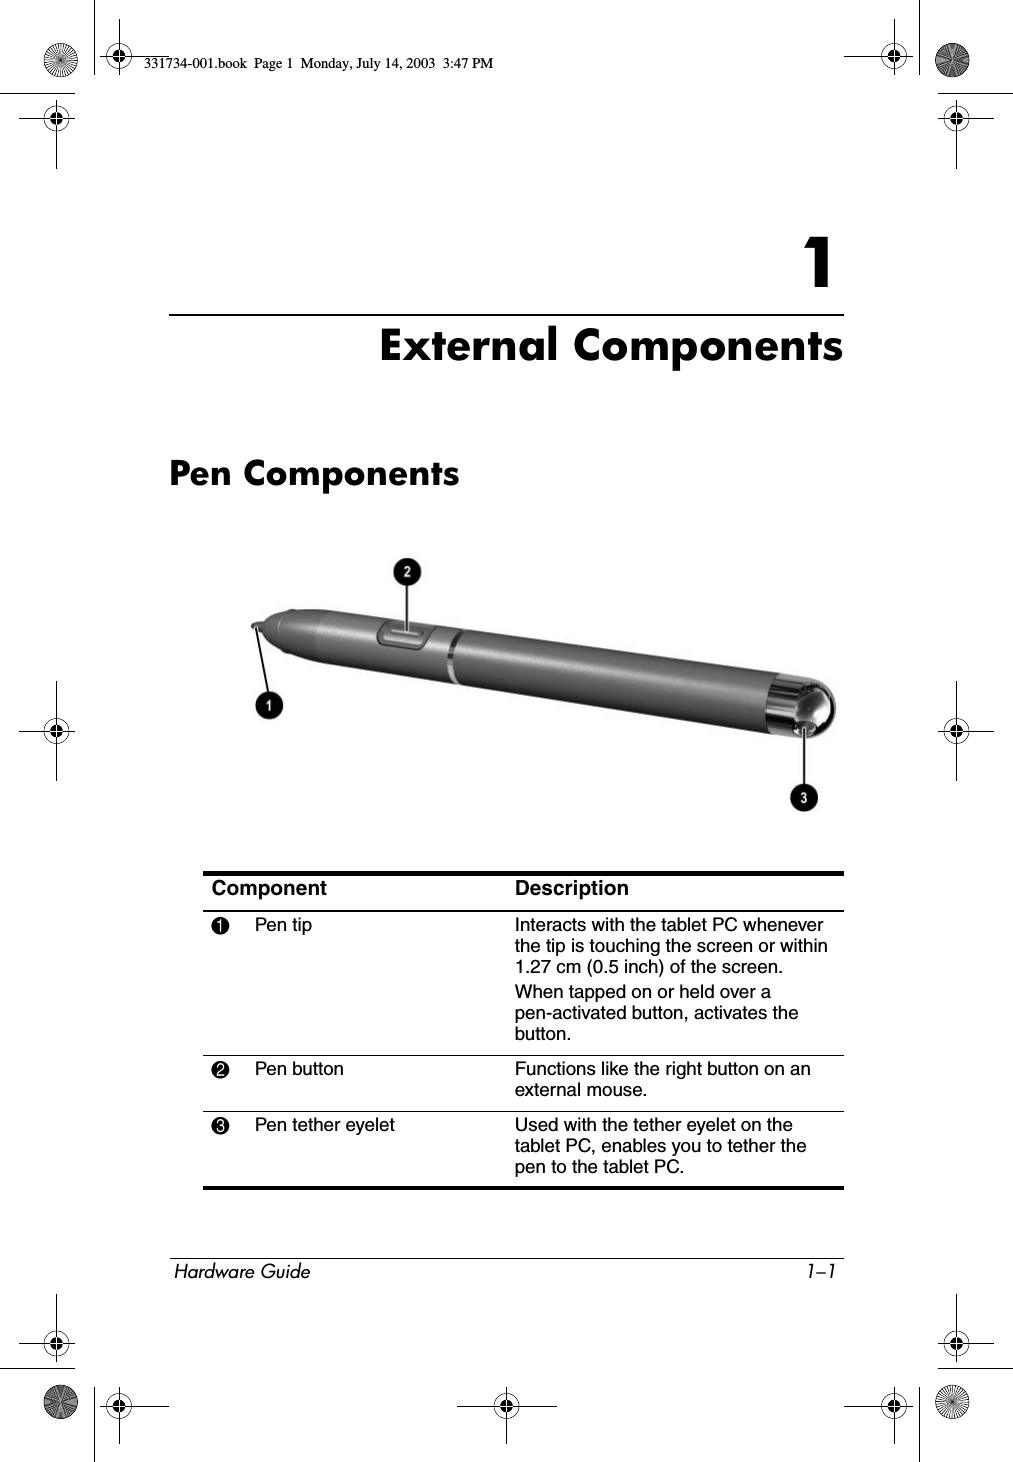 Hardware Guide 1–11External ComponentsPen ComponentsComponent Description1Pen tip Interacts with the tablet PC whenever the tip is touching the screen or within 1.27 cm (0.5 inch) of the screen.When tapped on or held over a pen-activated button, activates the button.2Pen button Functions like the right button on an external mouse.3Pen tether eyelet Used with the tether eyelet on the tablet PC, enables you to tether the pen to the tablet PC.331734-001.book  Page 1  Monday, July 14, 2003  3:47 PM